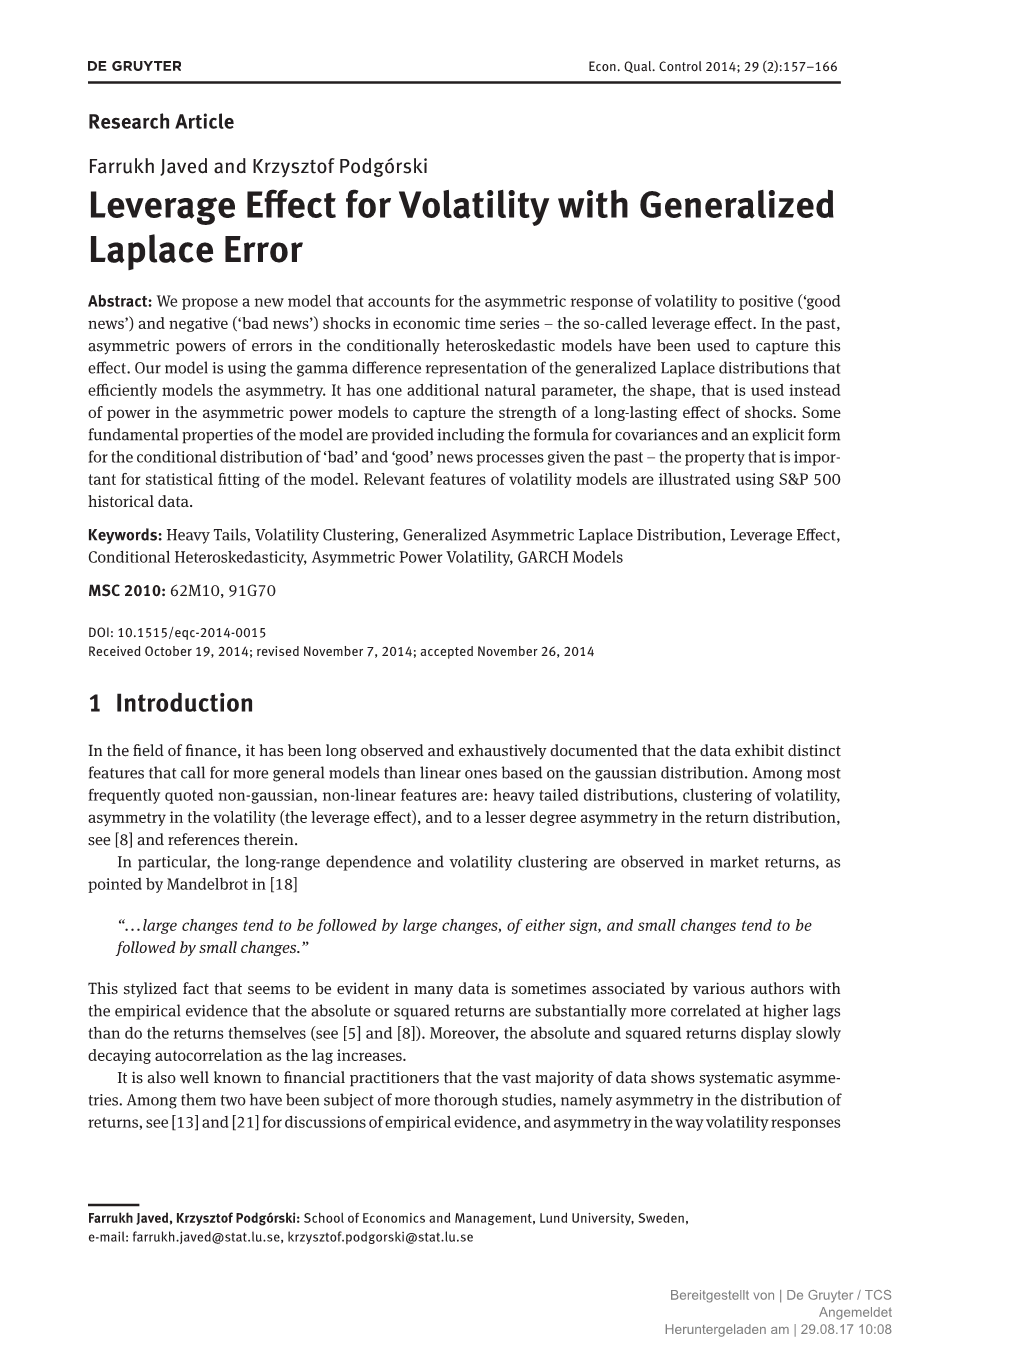 Leverage E Ect for Volatility with Generalized Laplace Error